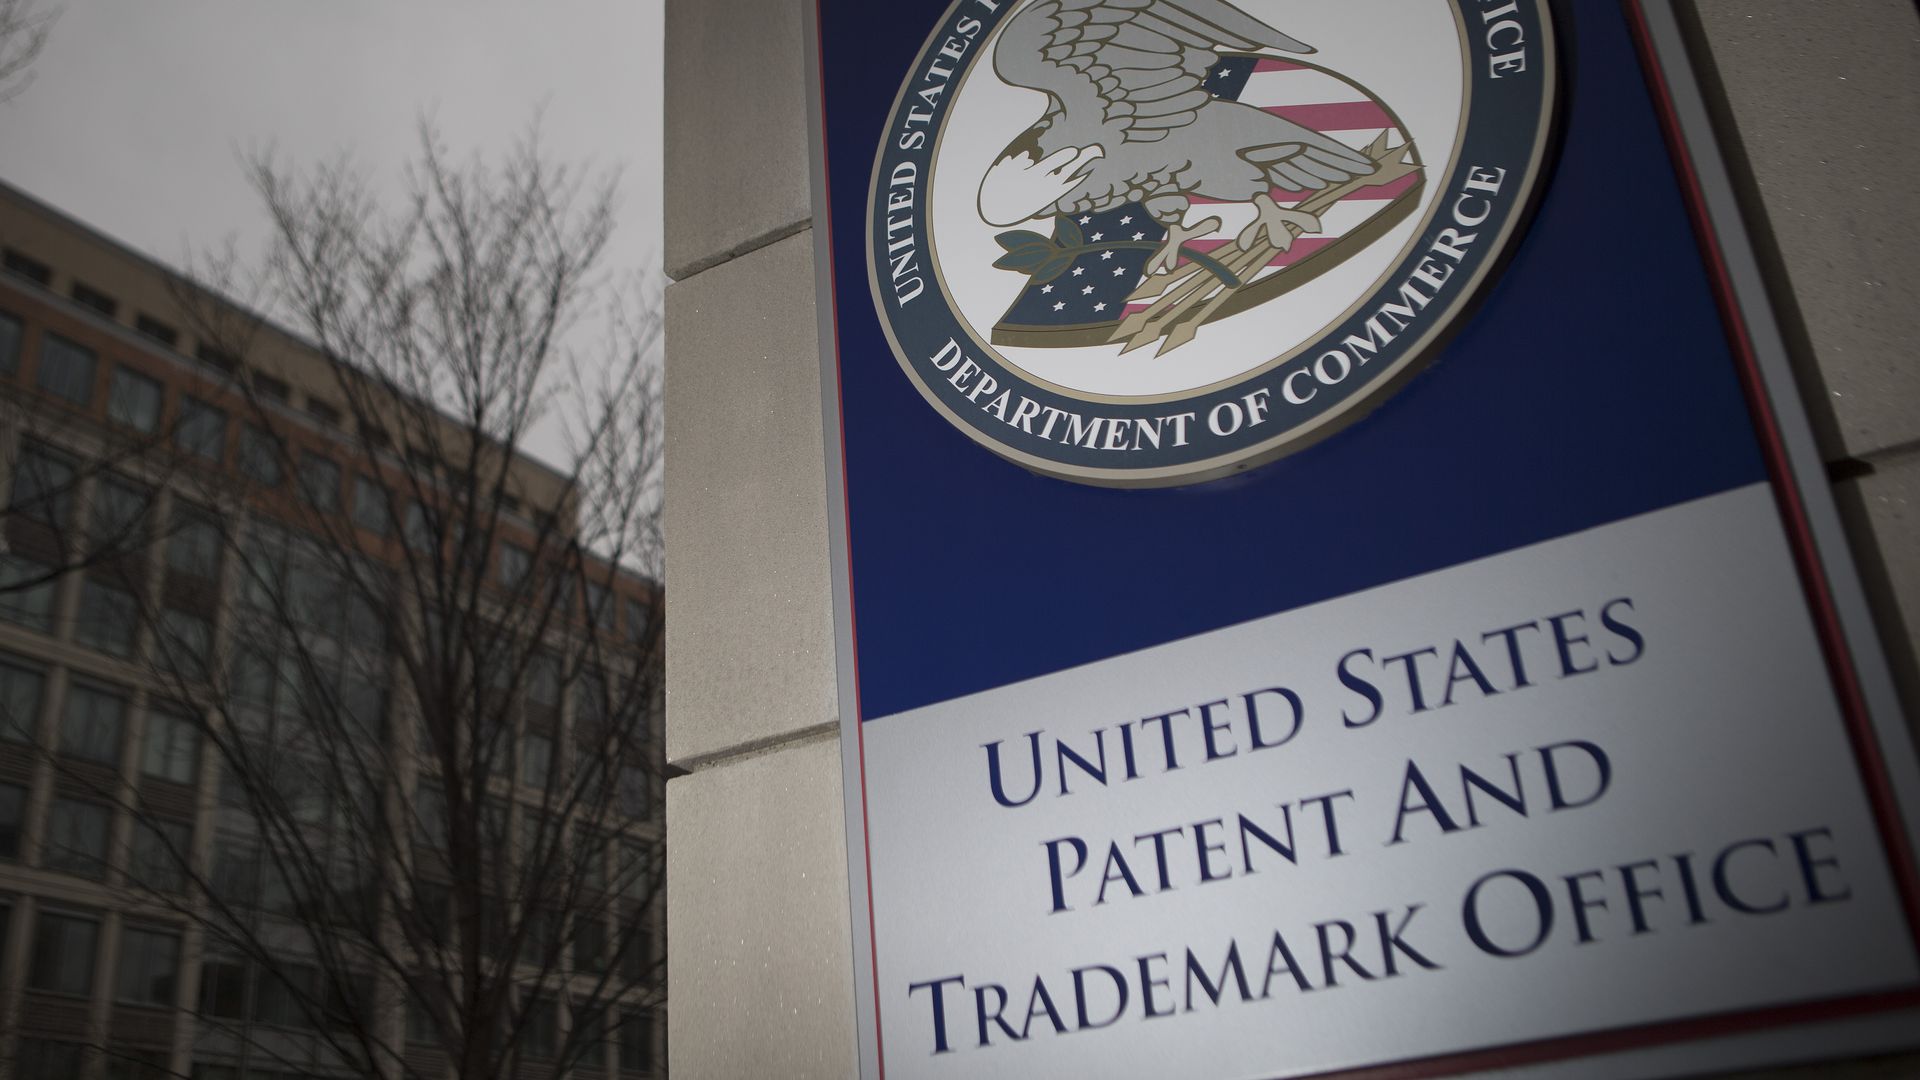 The U.S. Patent and Trademark Office (USPTO) seal is displayed outside the headquarters in Alexandria, Virginia, U.S., on Friday, April 4, 2014. 